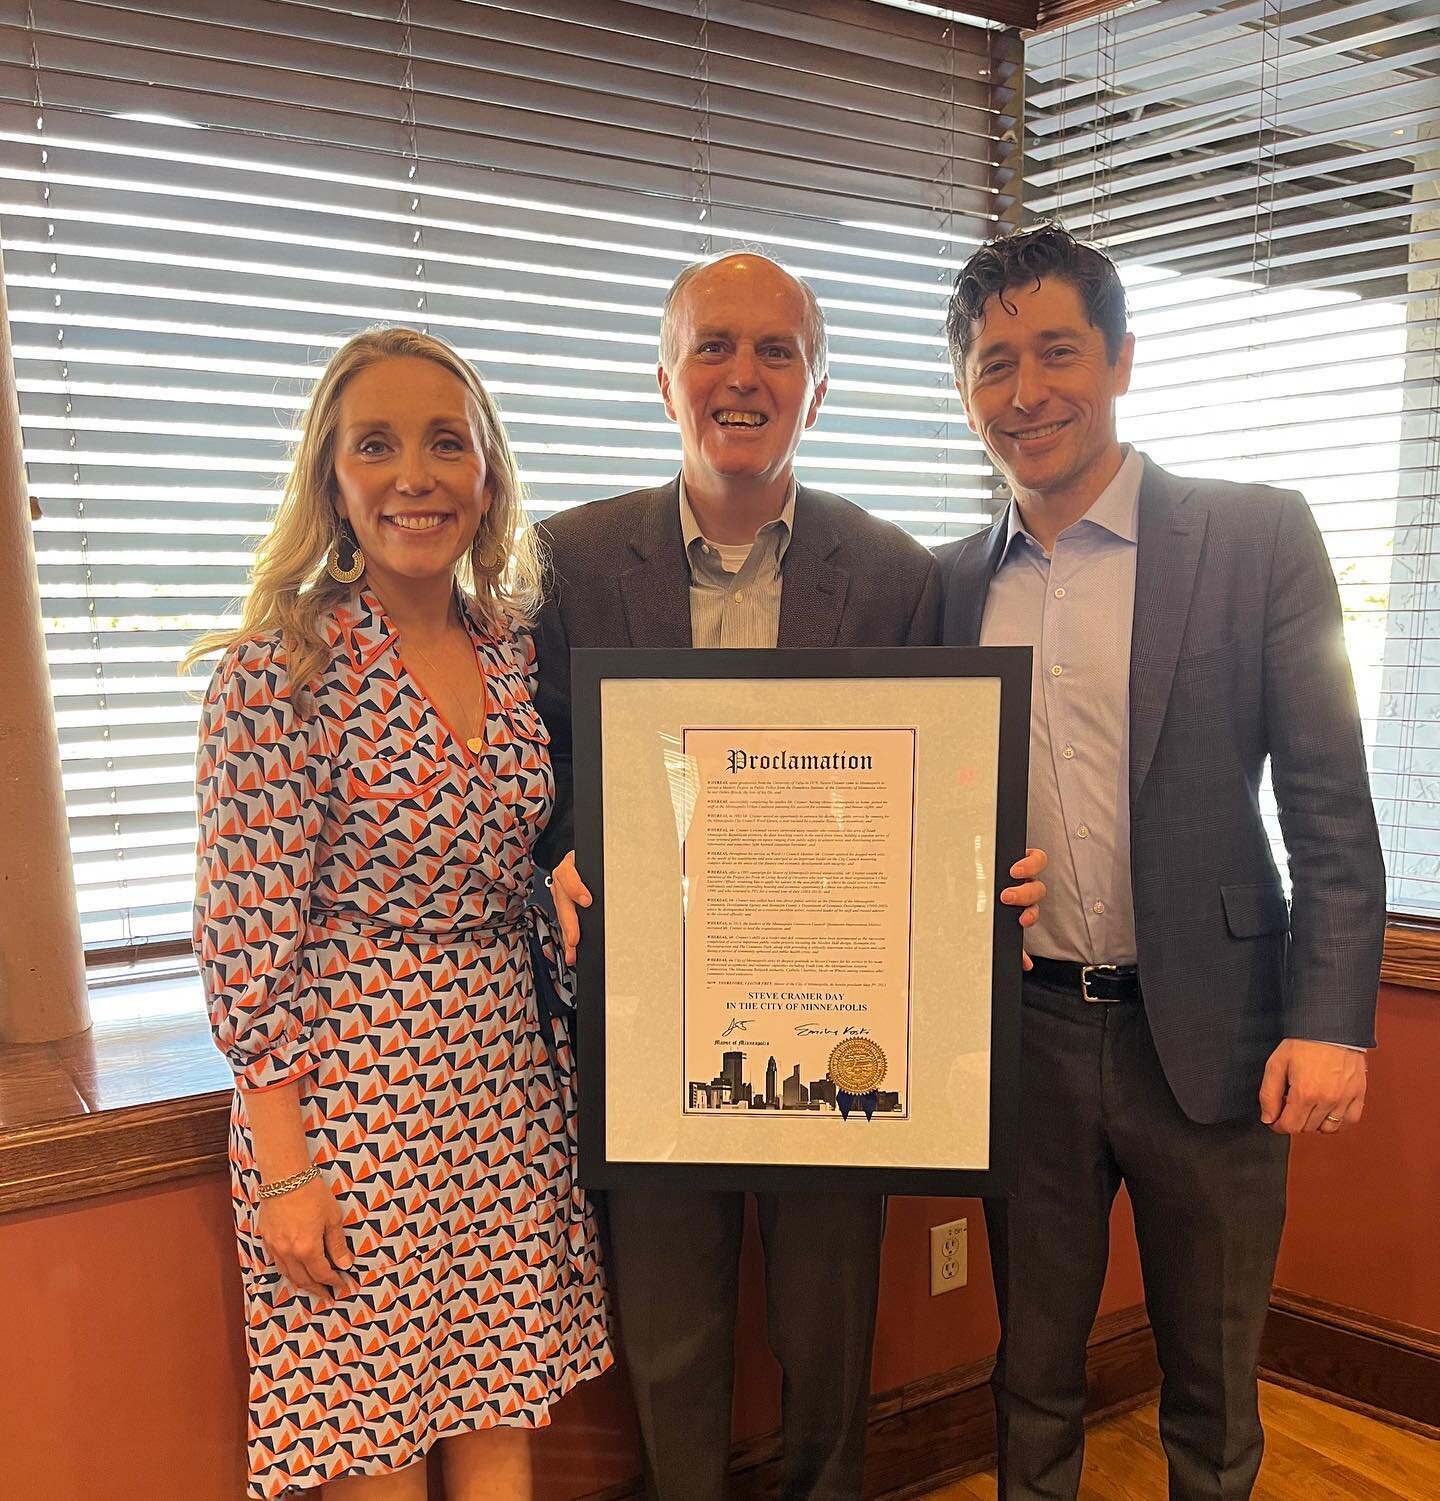 This week we proclaimed May 3rd as Steve Cramer Day in the City of Minneapolis. Steve is a former Ward 11 City Council Member (1984-1993) and just announced his retirement as the CEO of the Downtown Council. I am proud to honor Steve for his dedicati